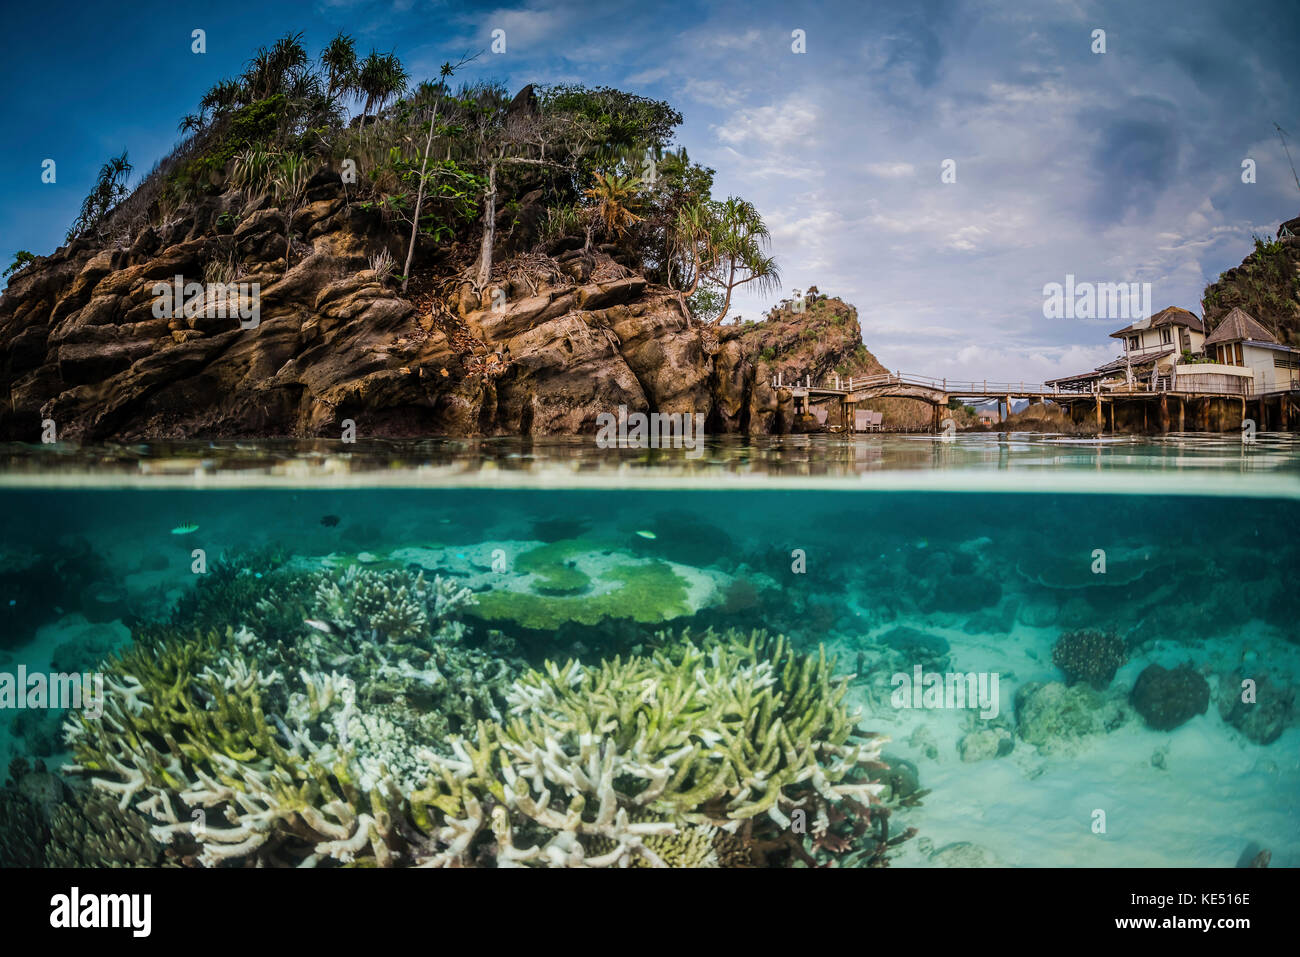 An over under image of Misool Eco Resort and its surrounding bay, Indonesia. Stock Photo